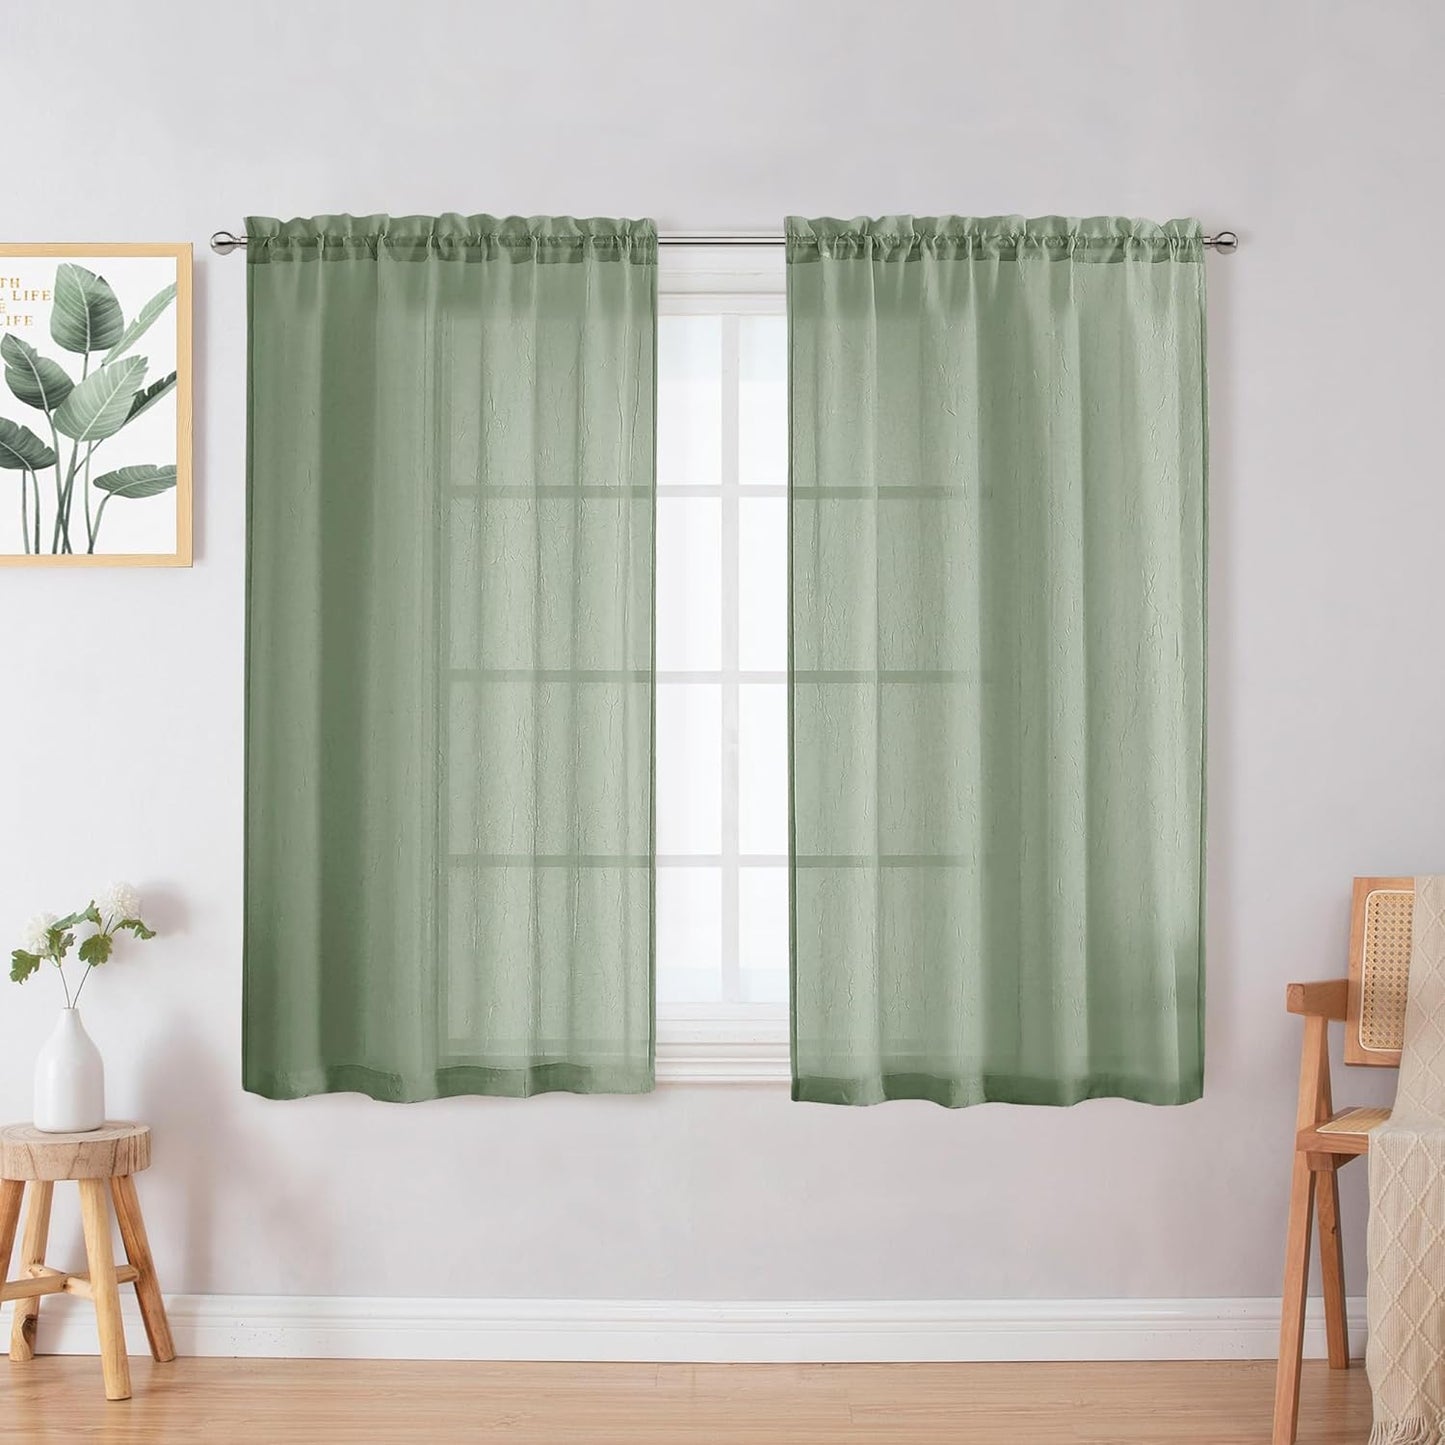 Crushed Sheer White Curtains 63 Inch Length 2 Panels, Light Filtering Solid Crinkle Voile Short Sheer Curtian for Bedroom Living Room, Each 42Wx63L Inches  Chyhomenyc Sage Green 42 W X 45 L 